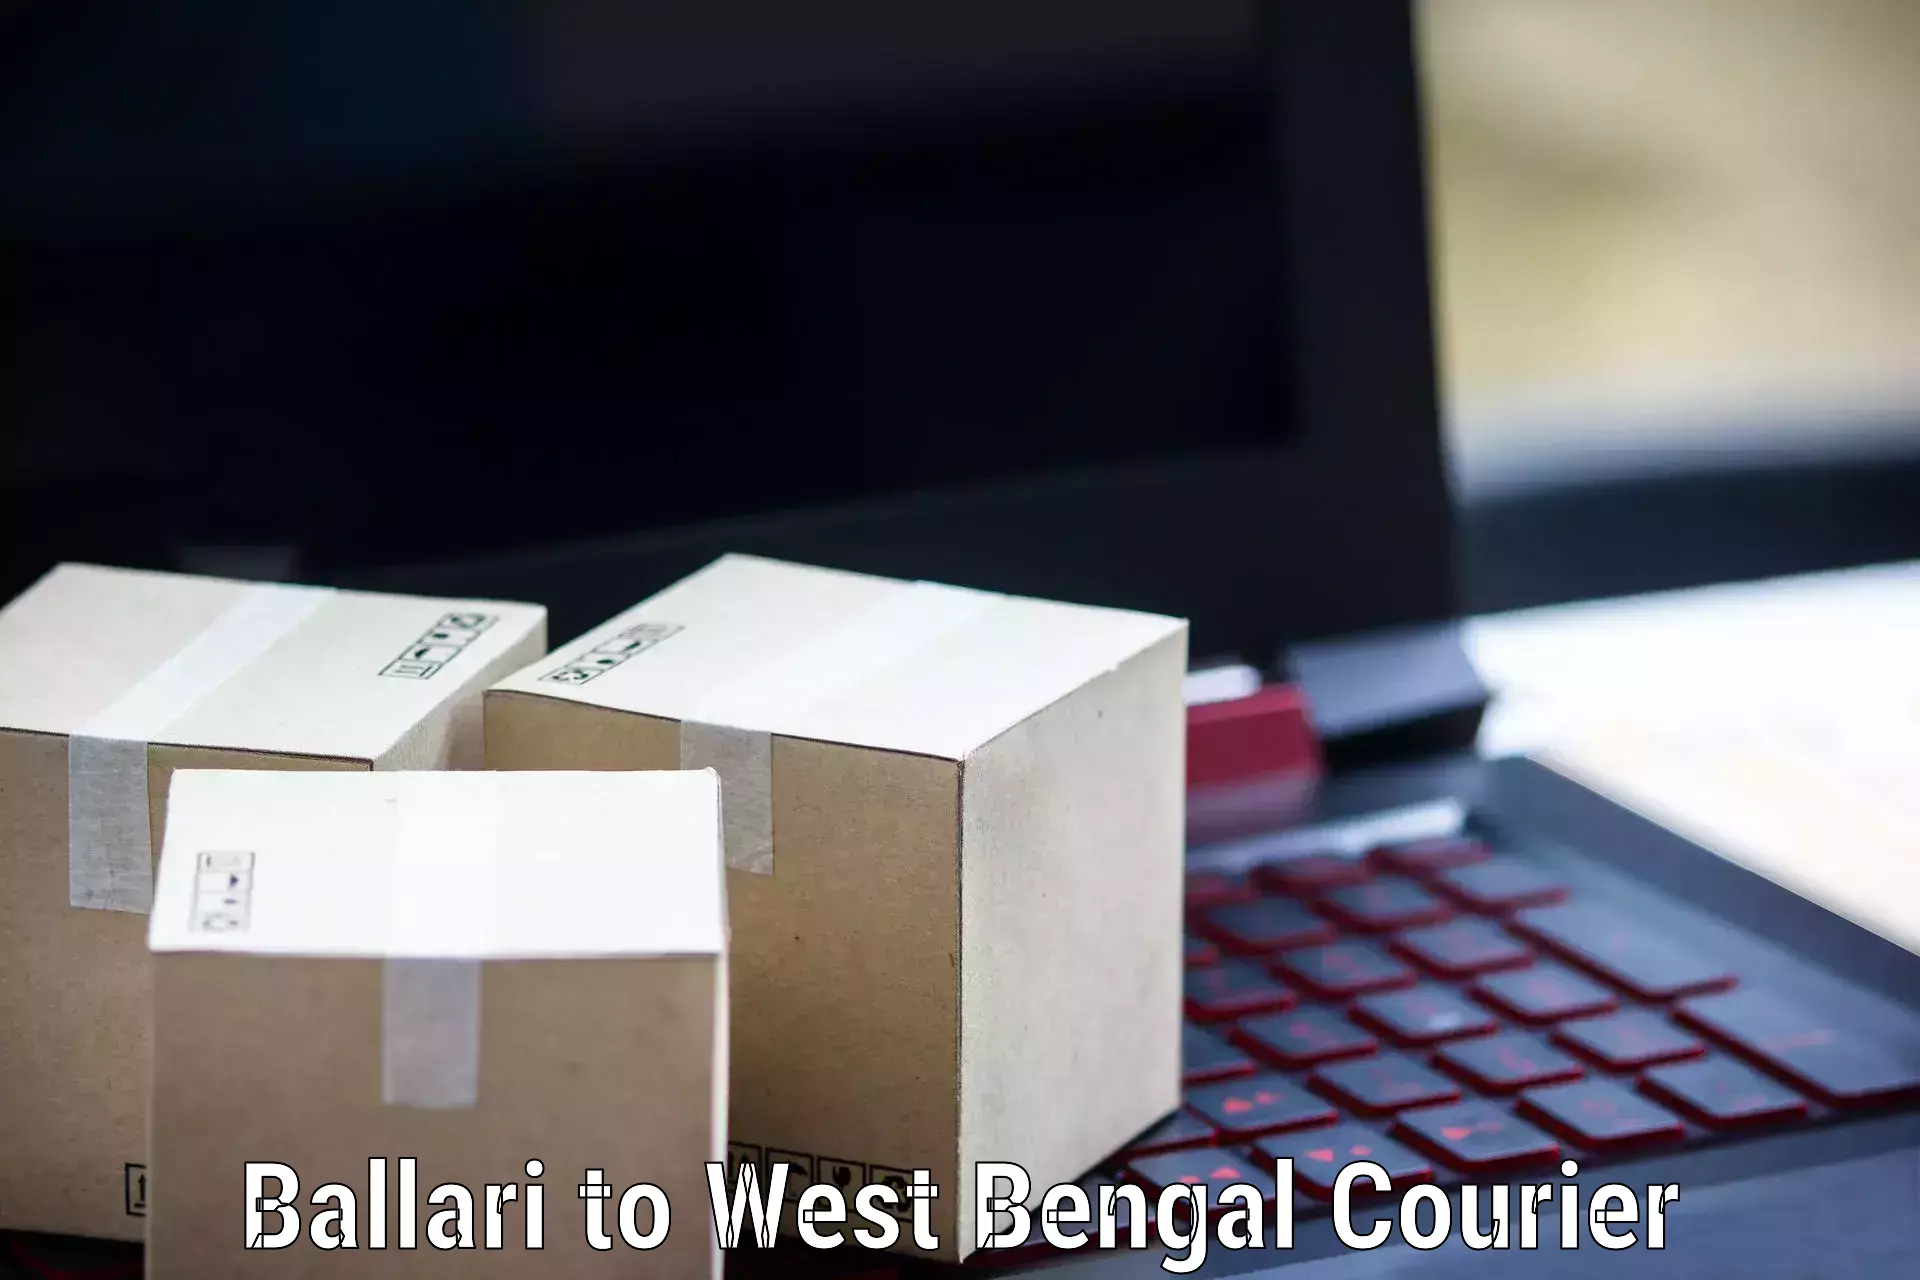 Affordable parcel service Ballari to West Bengal